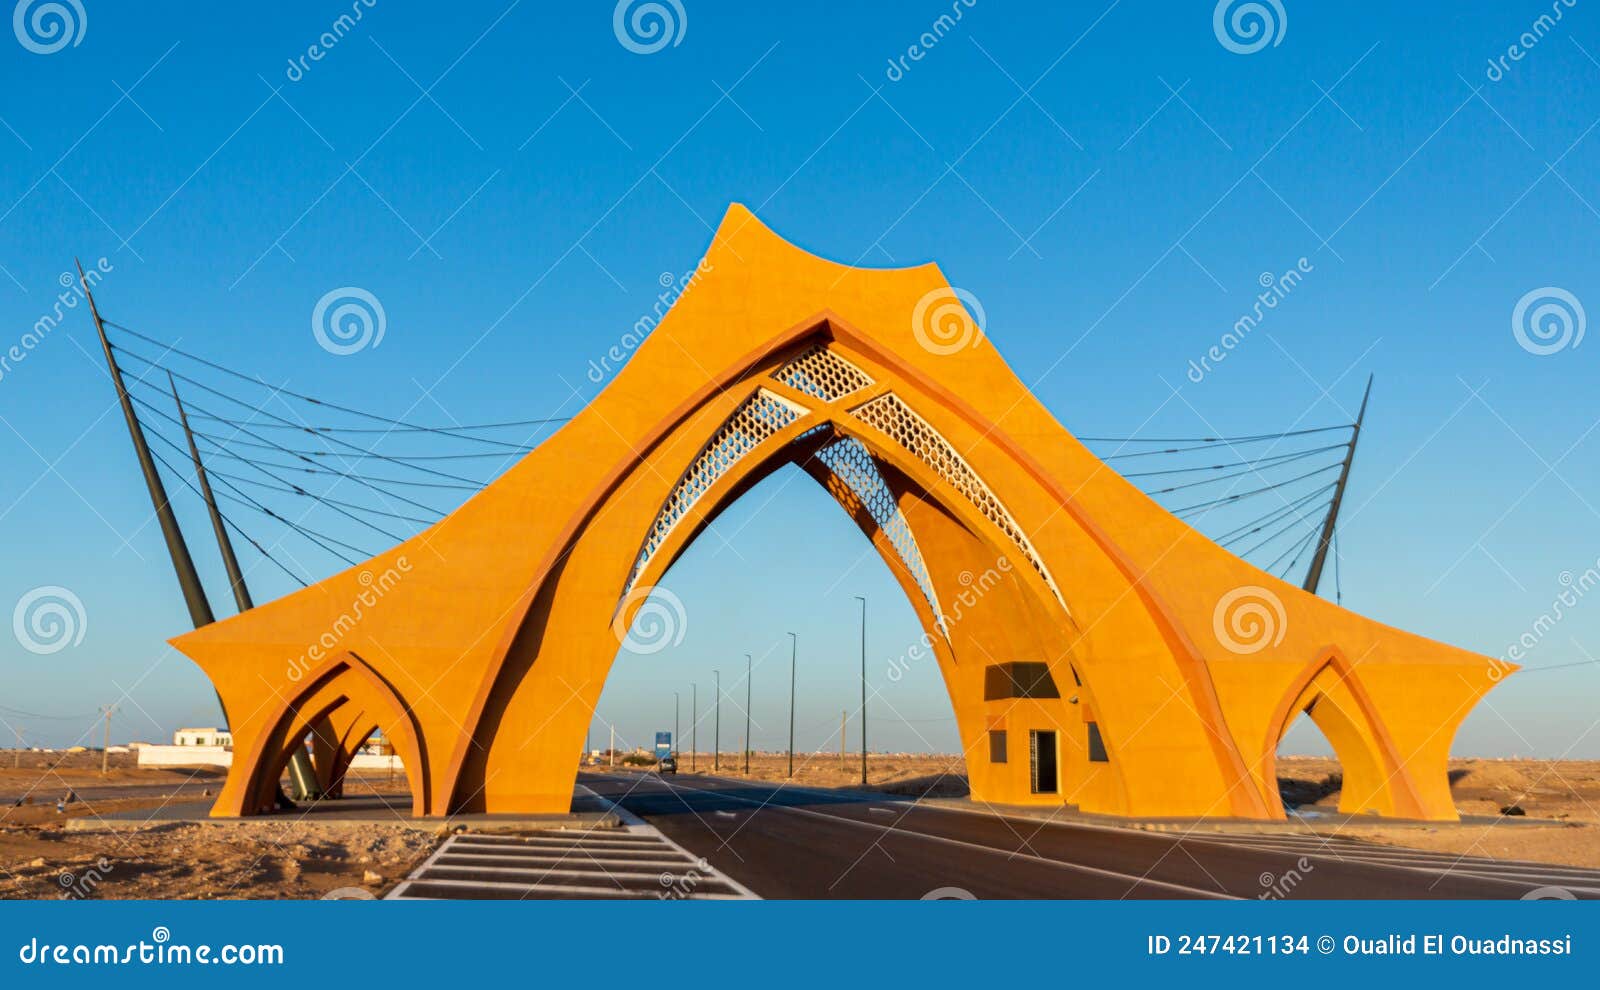 New Southern Entrance To Laayoune City Morocco New Southern Entrance To Laayoune City Morocco Which Tent 247421134 